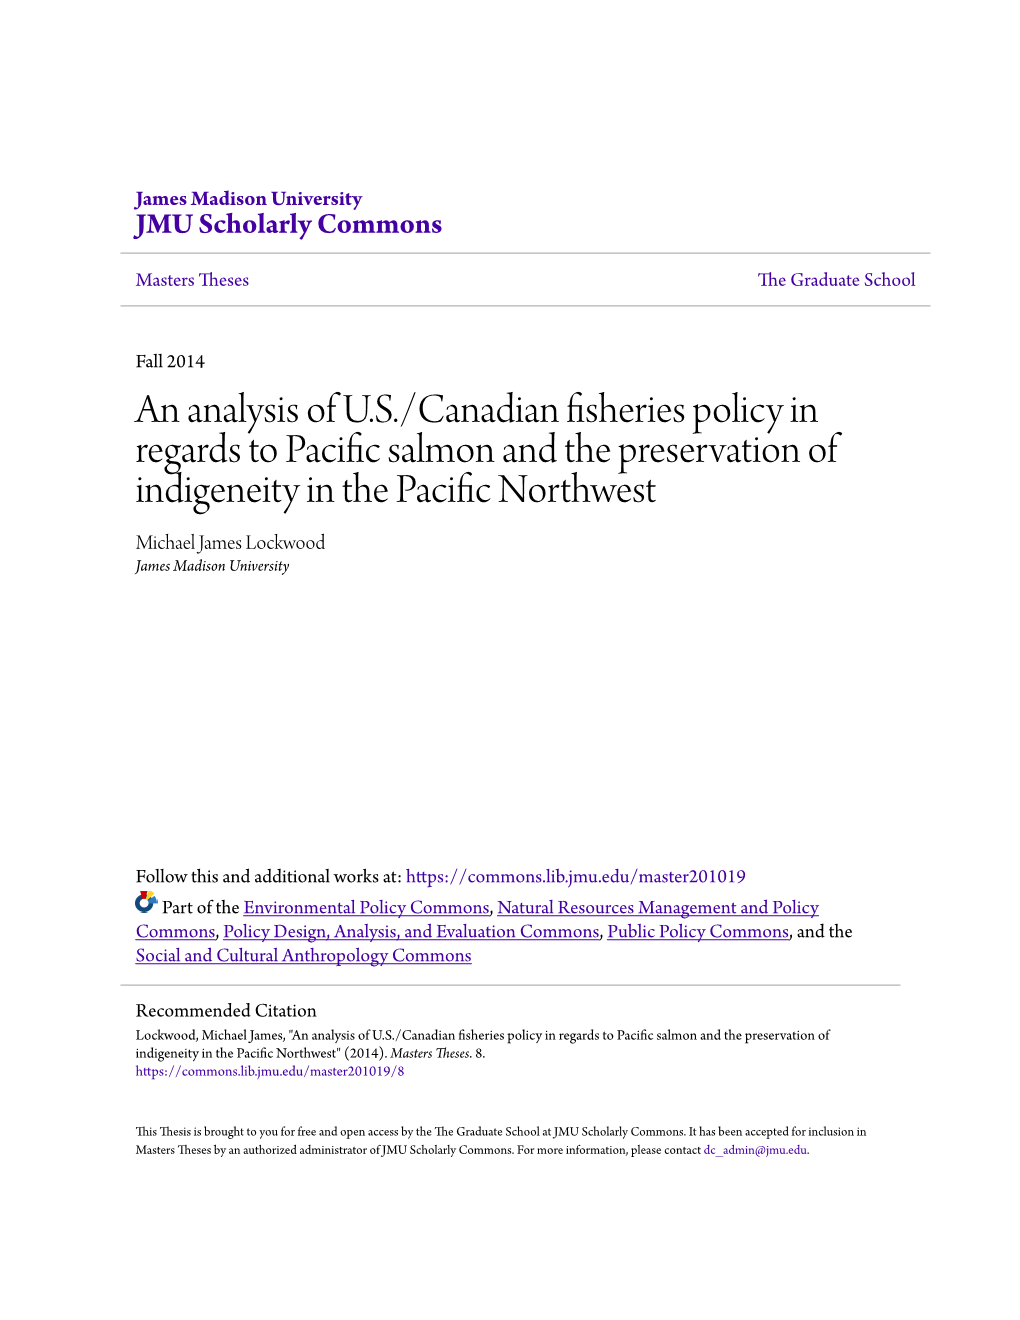 An Analysis of U.S./Canadian Fisheries Policy in Regards to Pacific Salmon And